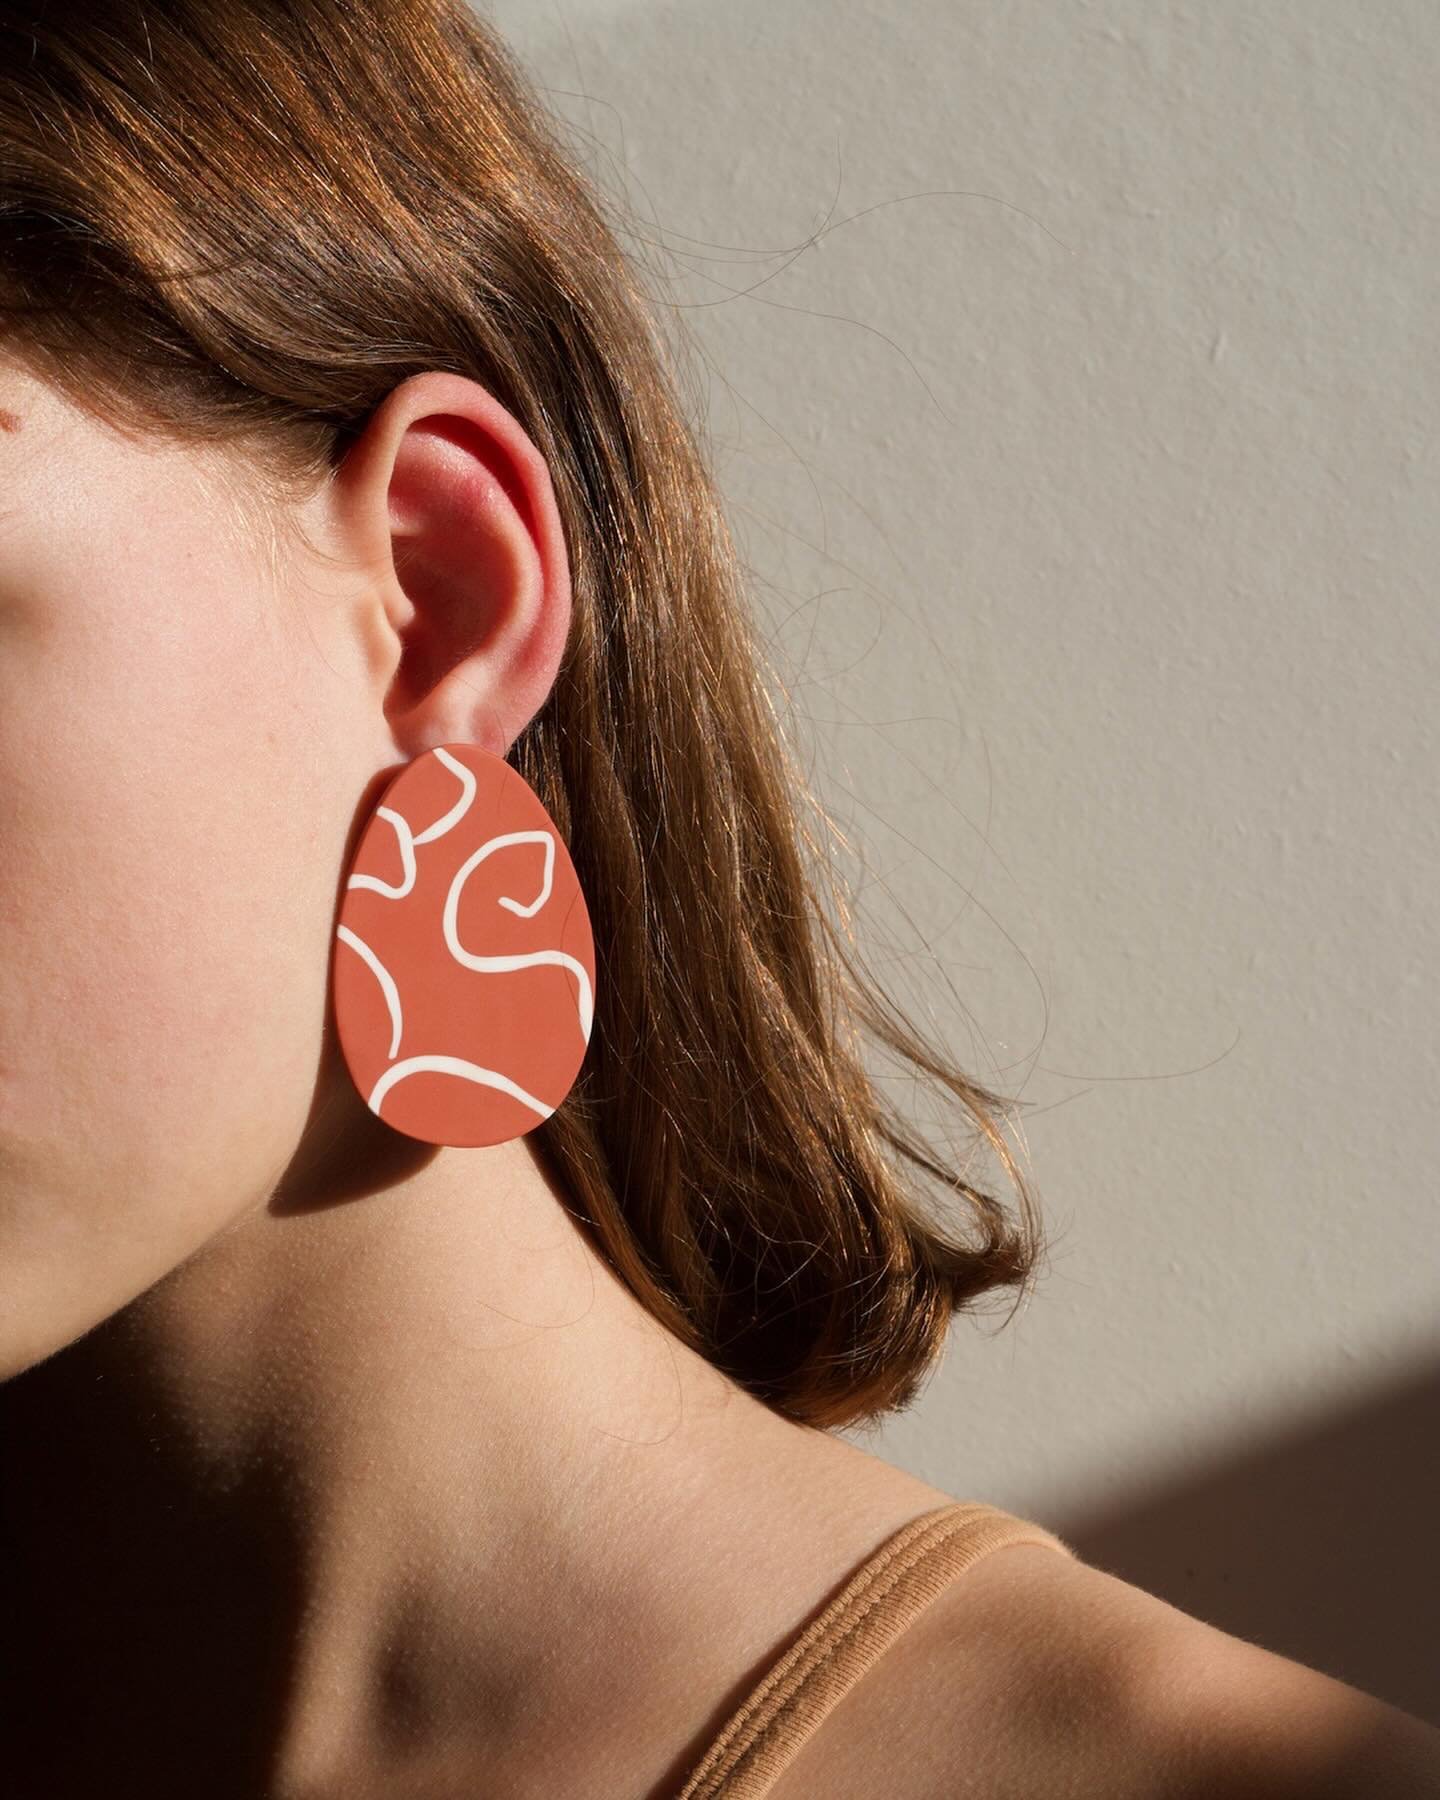 A best-seller from all times, Abstract in Terracota, Black and Translucent. Which one is your favorite? #hellozephyr #handmade #jewelrydesign #moderjewelry #earrings